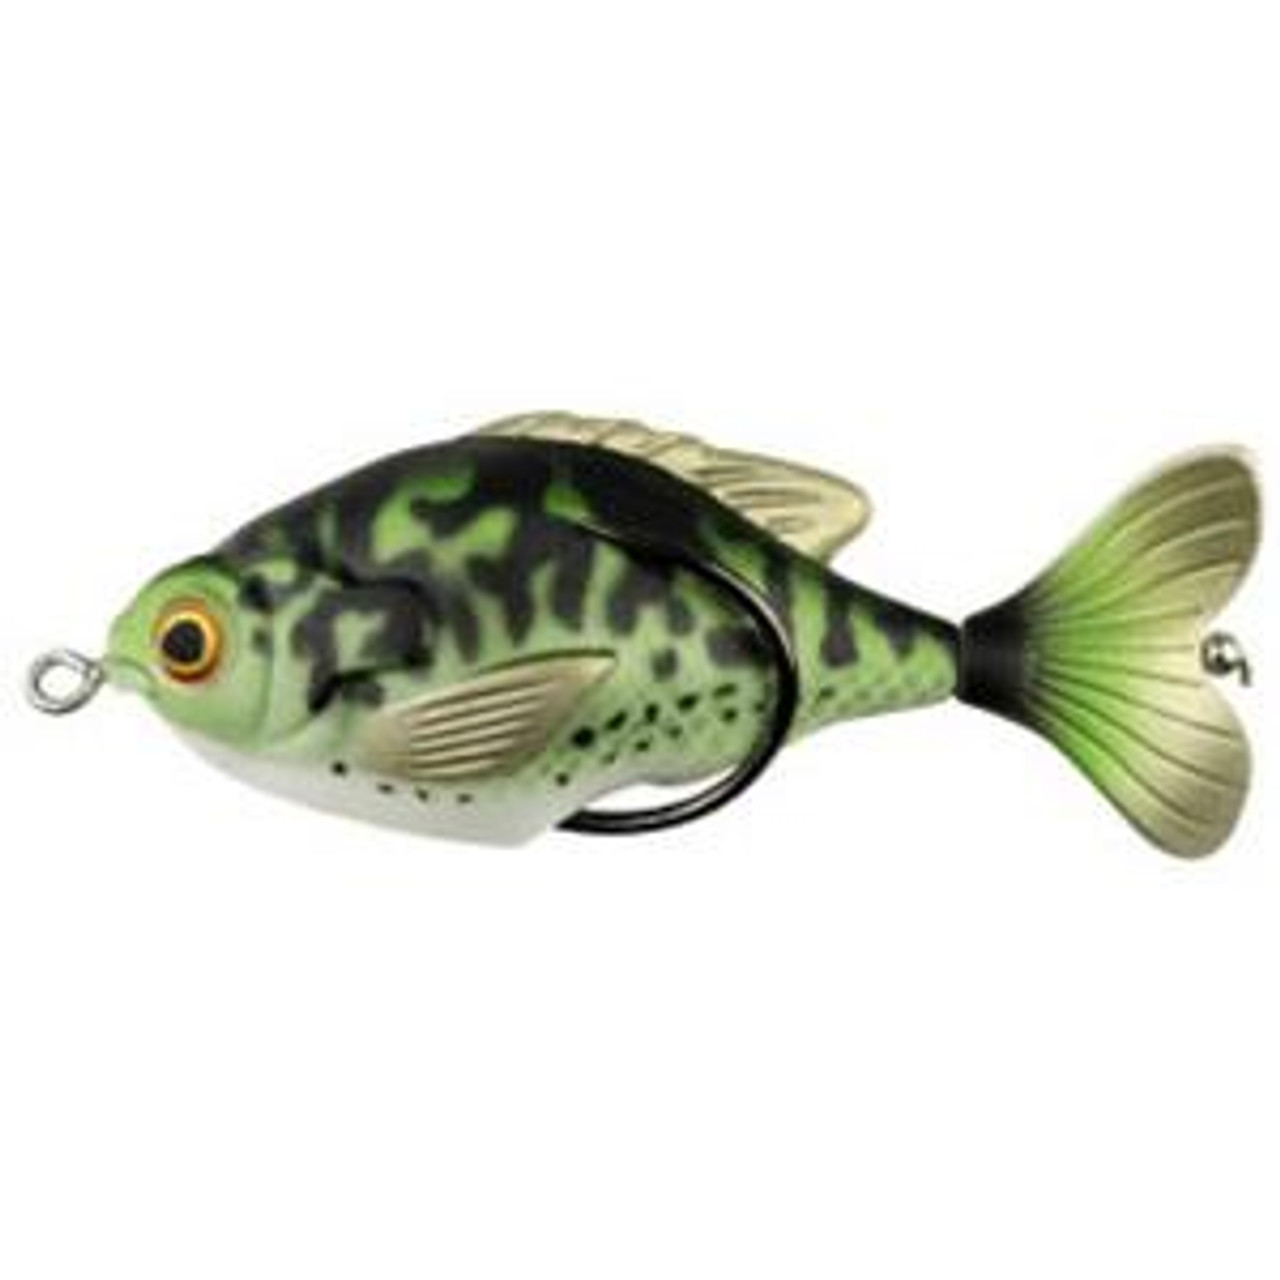 https://cdn11.bigcommerce.com/s-stfpjhht/images/stencil/1280x1280/products/18256/35979/Lunkerhunt-Prop-Sunfish-Freshwater-Soft-Lure-628853884013_image1__02758.1562605726.jpg?c=2